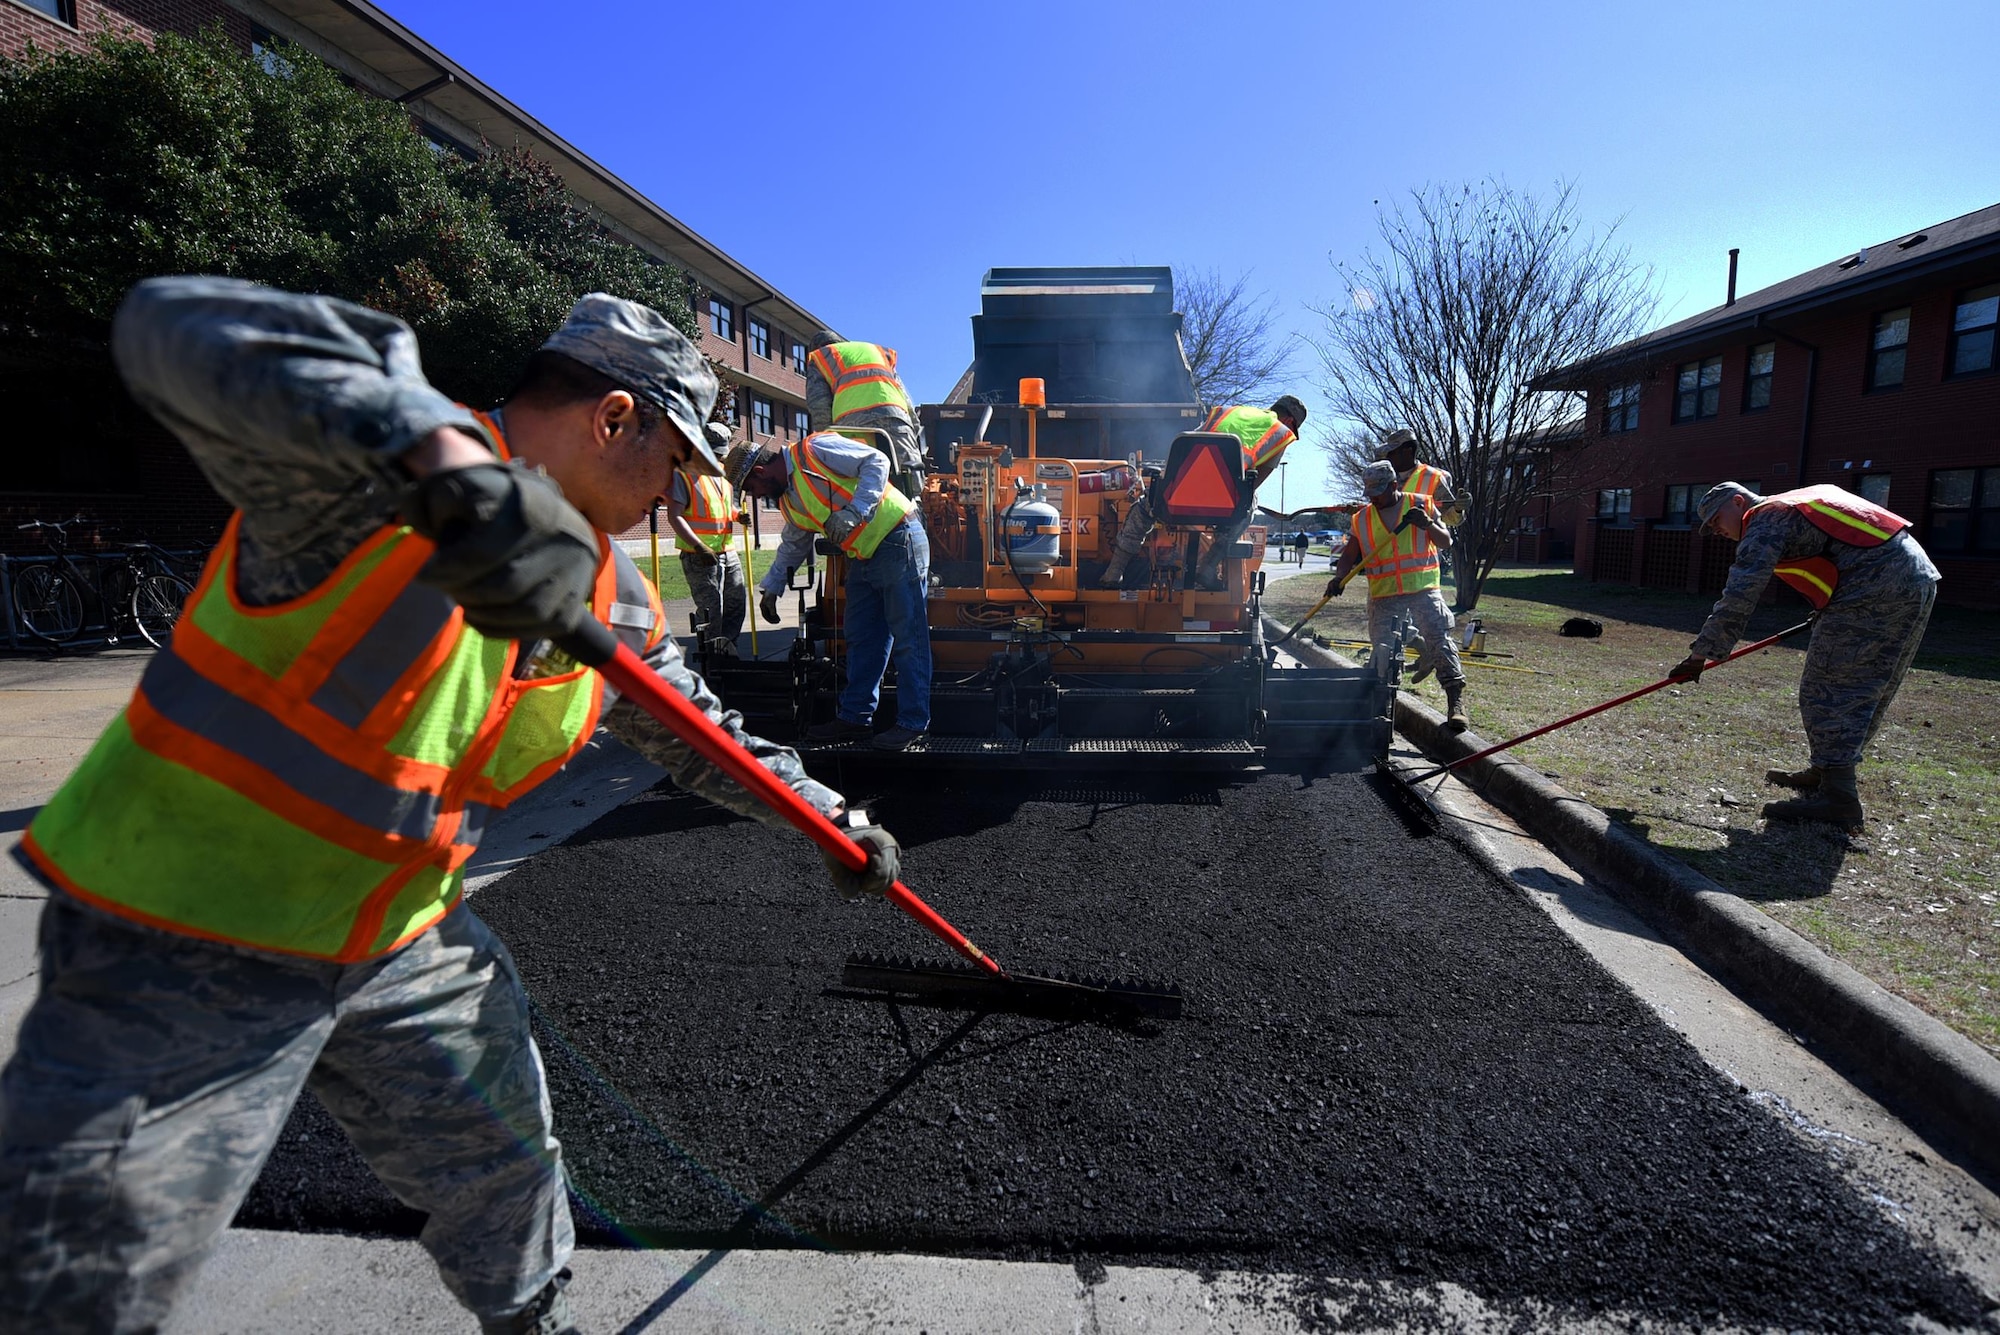 U.S. Air Force Senior Airman Allen Arceo, 19th Civil Engineer Squadron pavement and heavy equipment craftsman, uses a lute tool to spread the asphalt evenly Jan. 7, 2017 at Little Rock Air Force Base, Ark. The lute tool corrects any imperfections left behind by the paver and helps form the edges on the pavement. (U.S. Air Force photo by Airman 1st Class Kevin Sommer Giron)